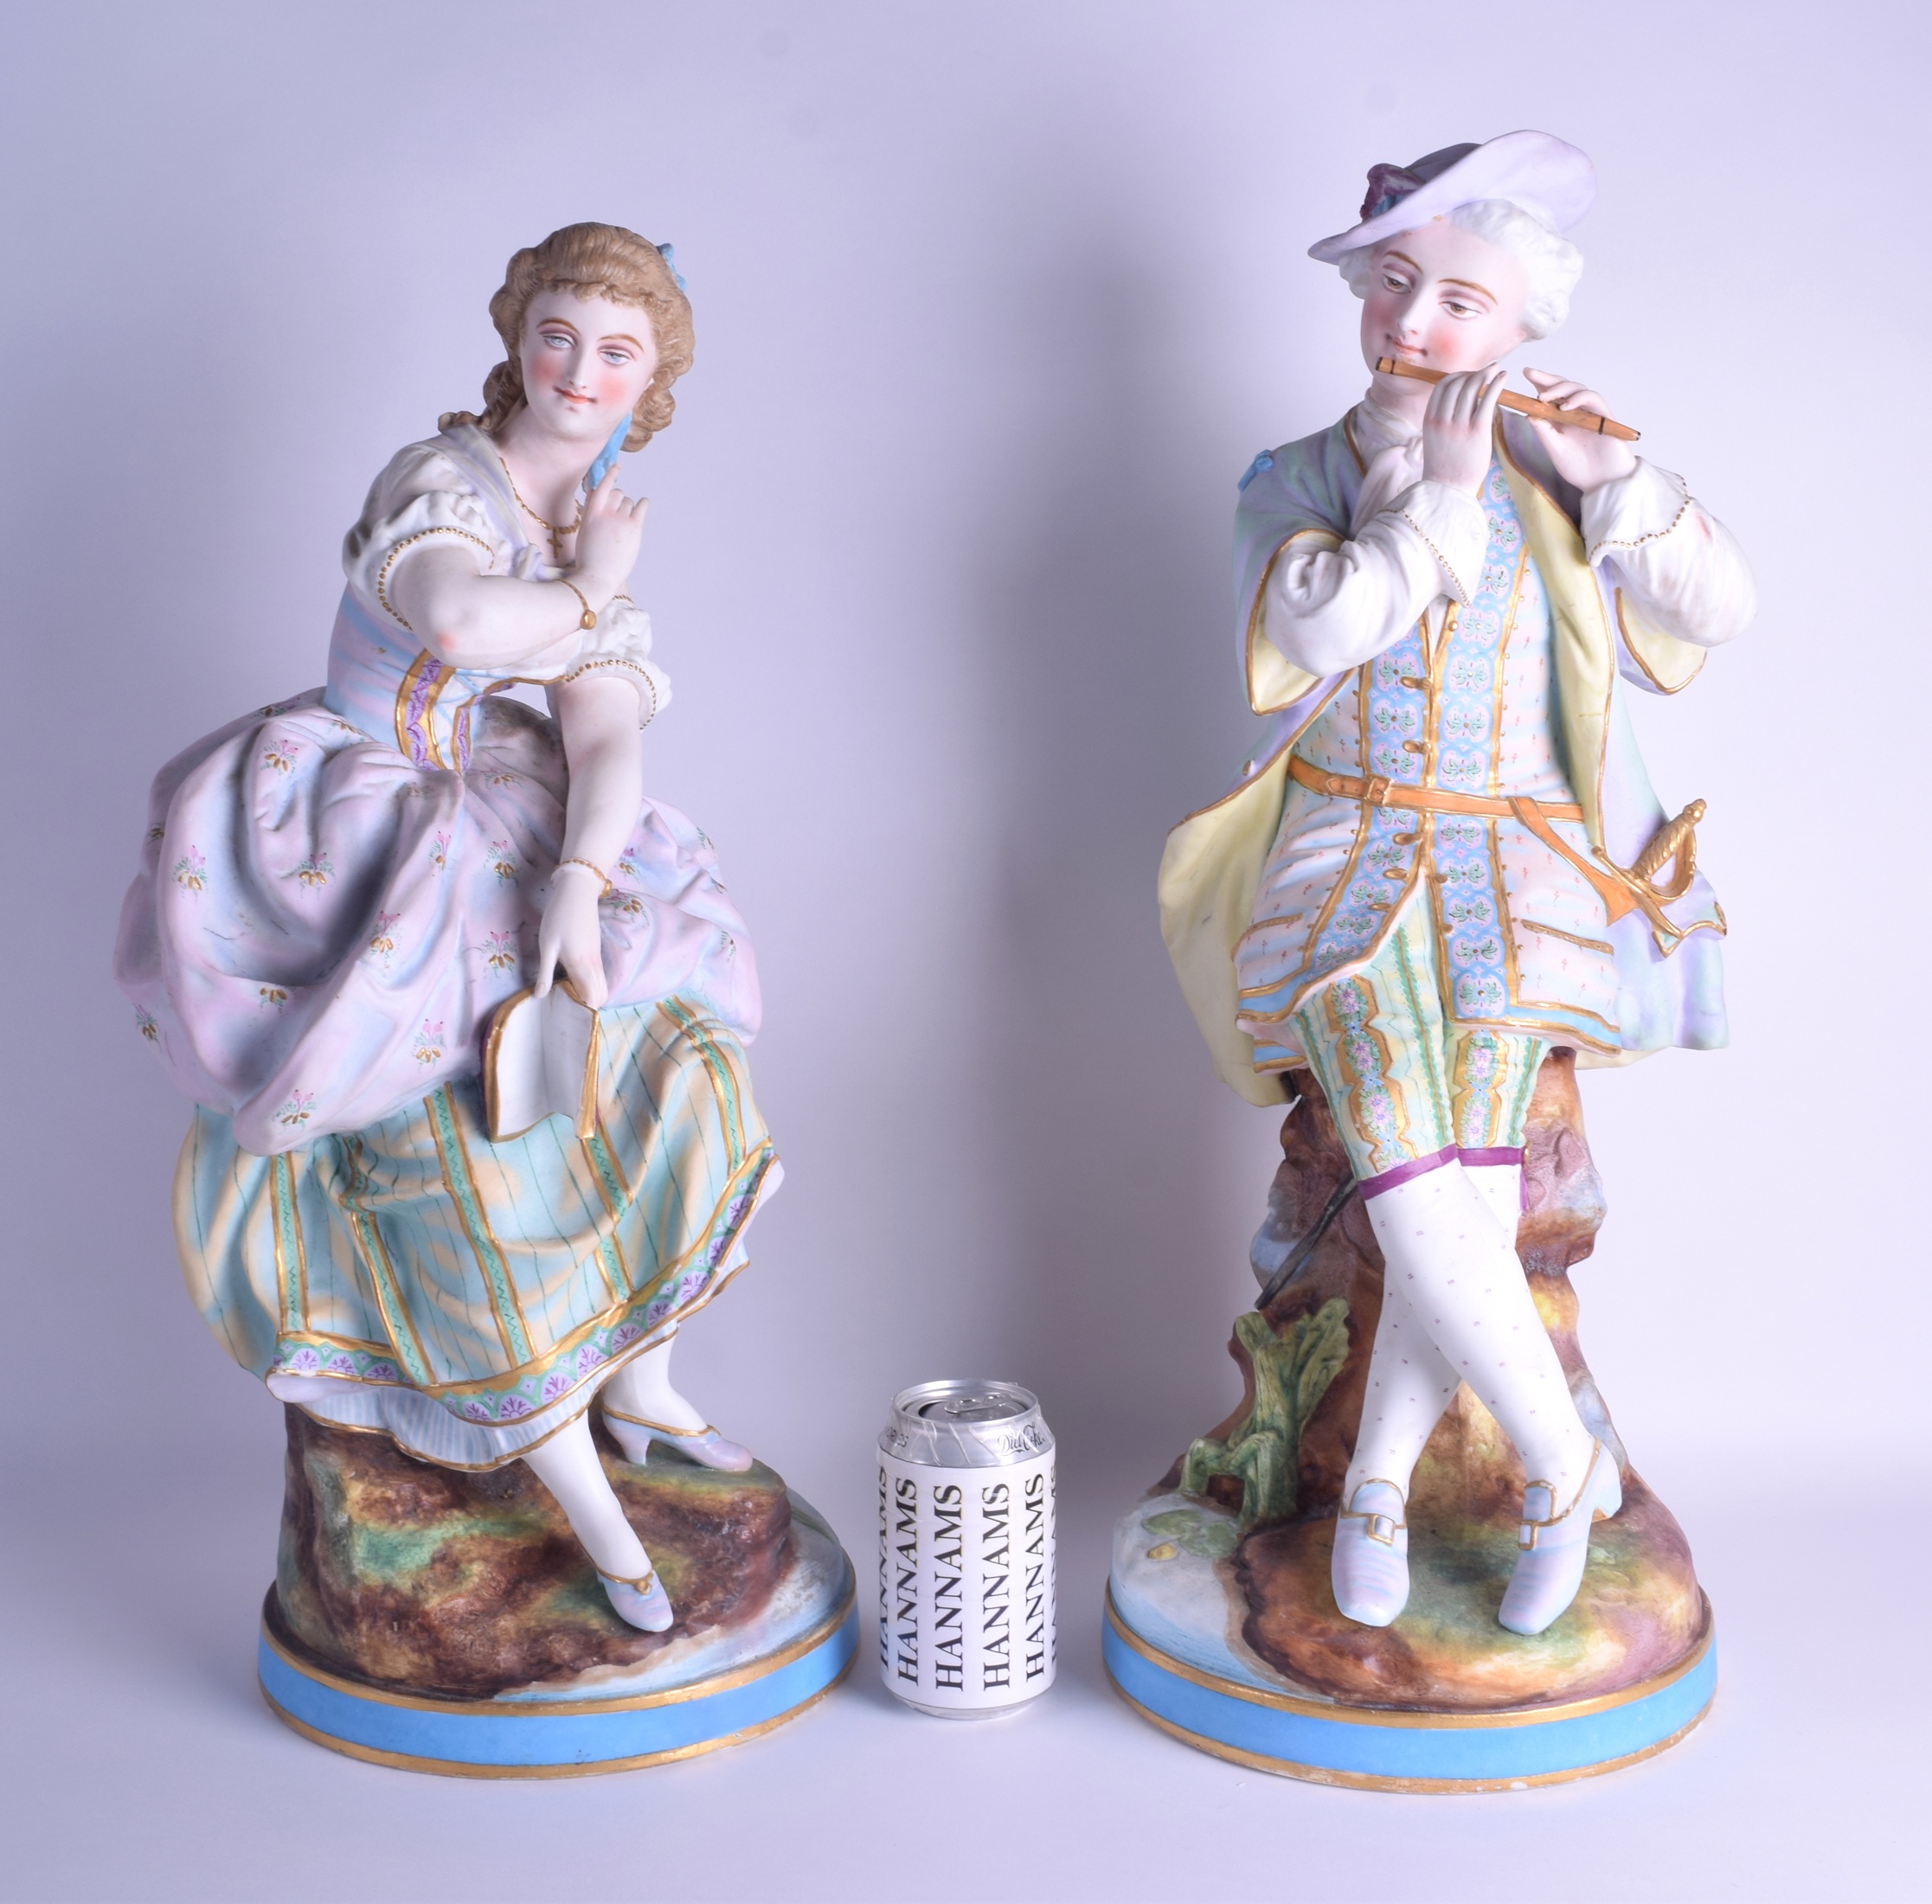 A LARGE PAIR OF 19TH CENTURY FRENCH BISQUE PORCELAIN FIGURES modelled as a male and musician and